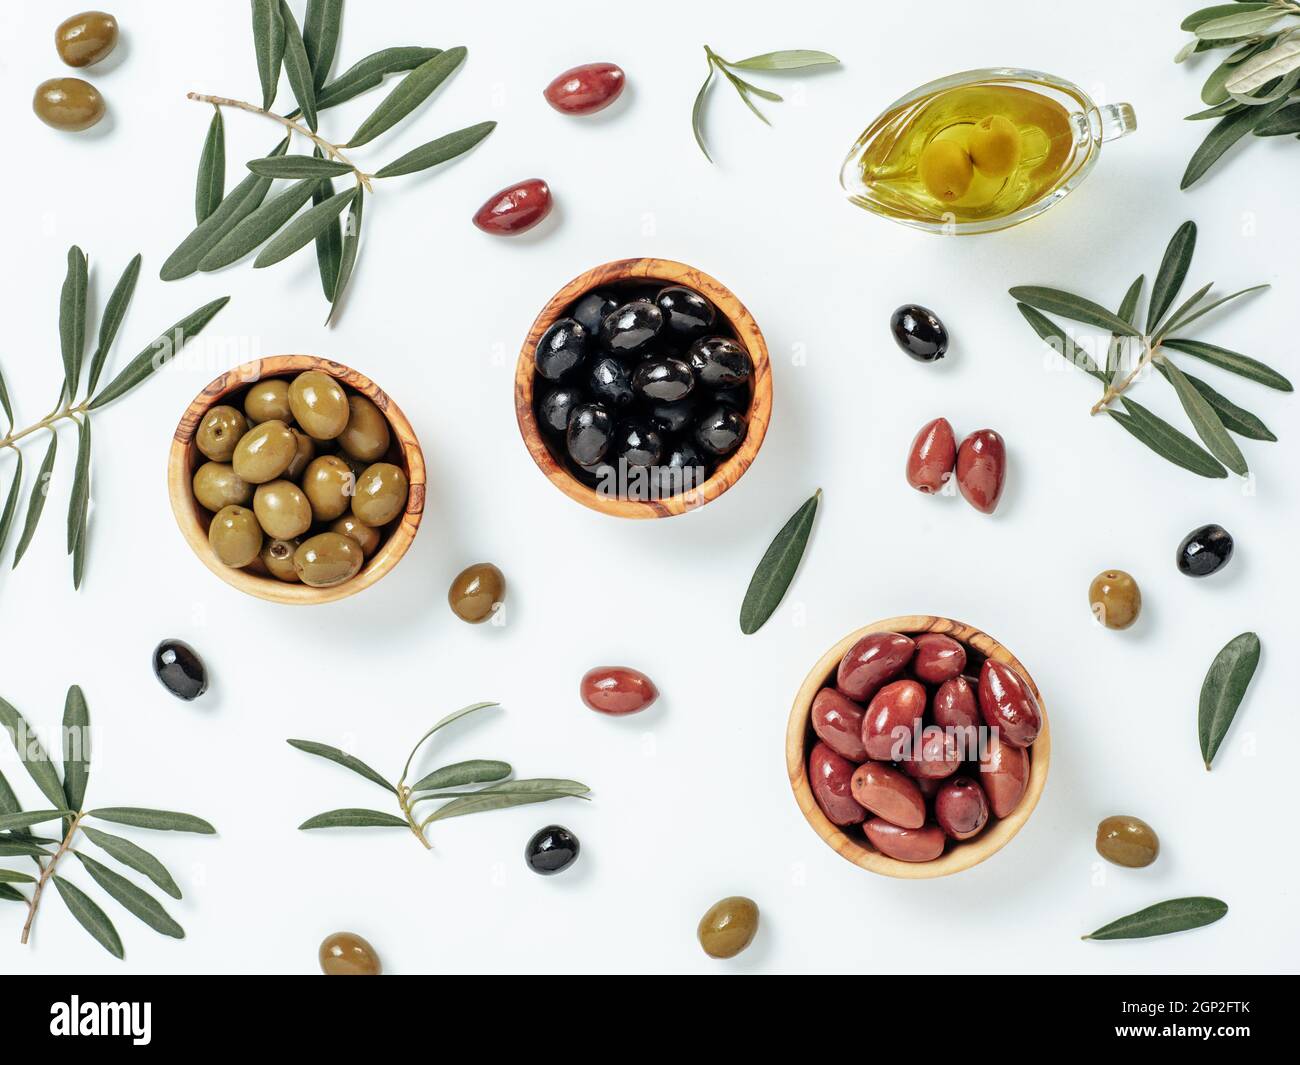 Set of green olives, black olives and red kalmata olives and extra virgin olive oil on white background. Top view of different types of olives in bowl Stock Photo